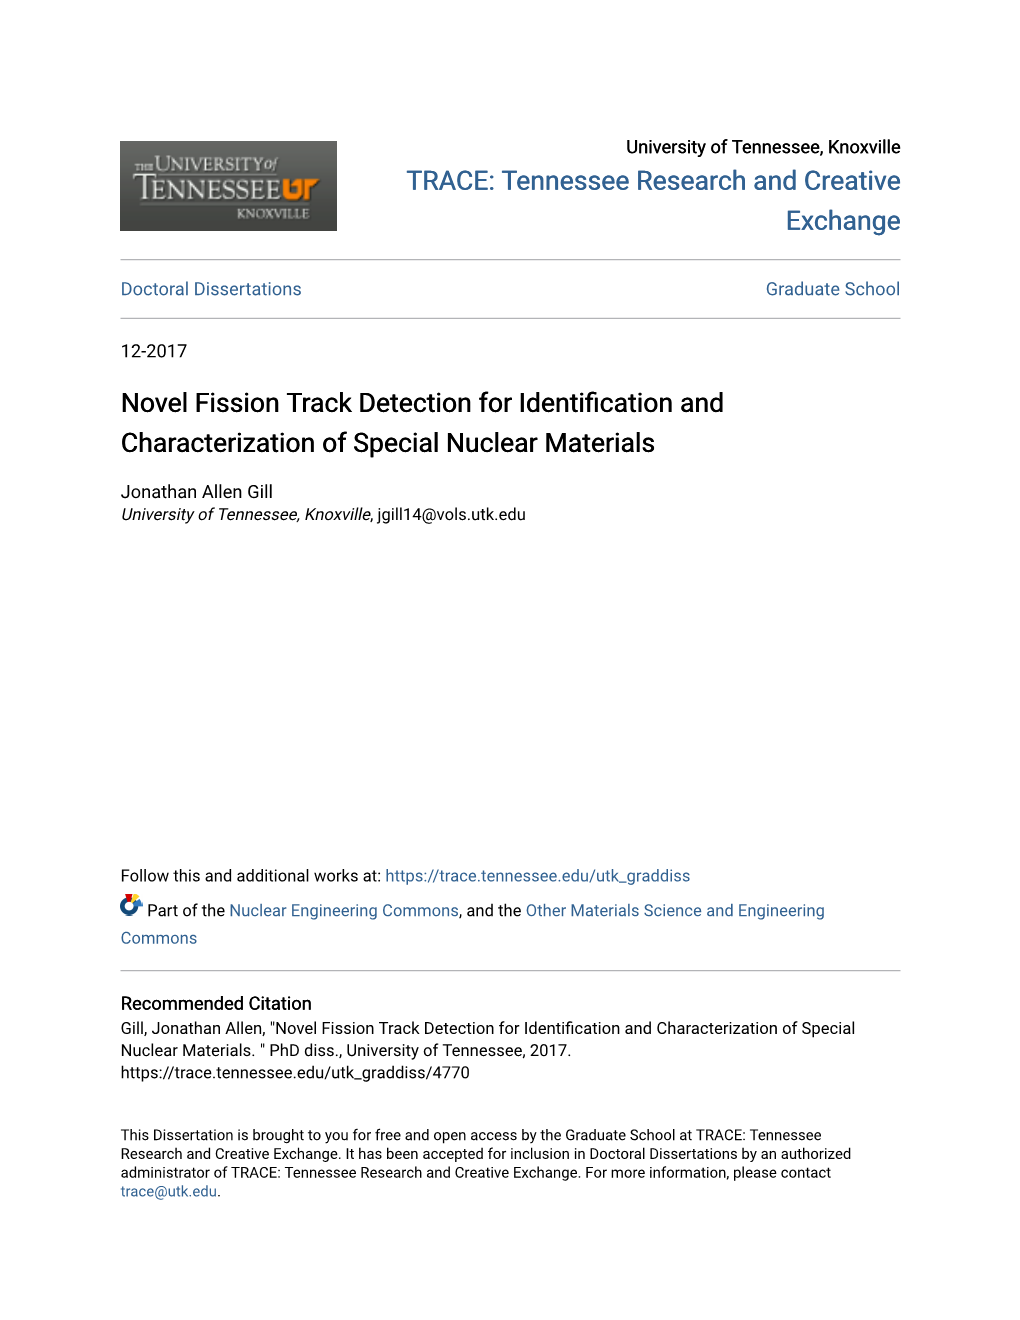 Novel Fission Track Detection for Identification and Characterization of Special Nuclear Materials